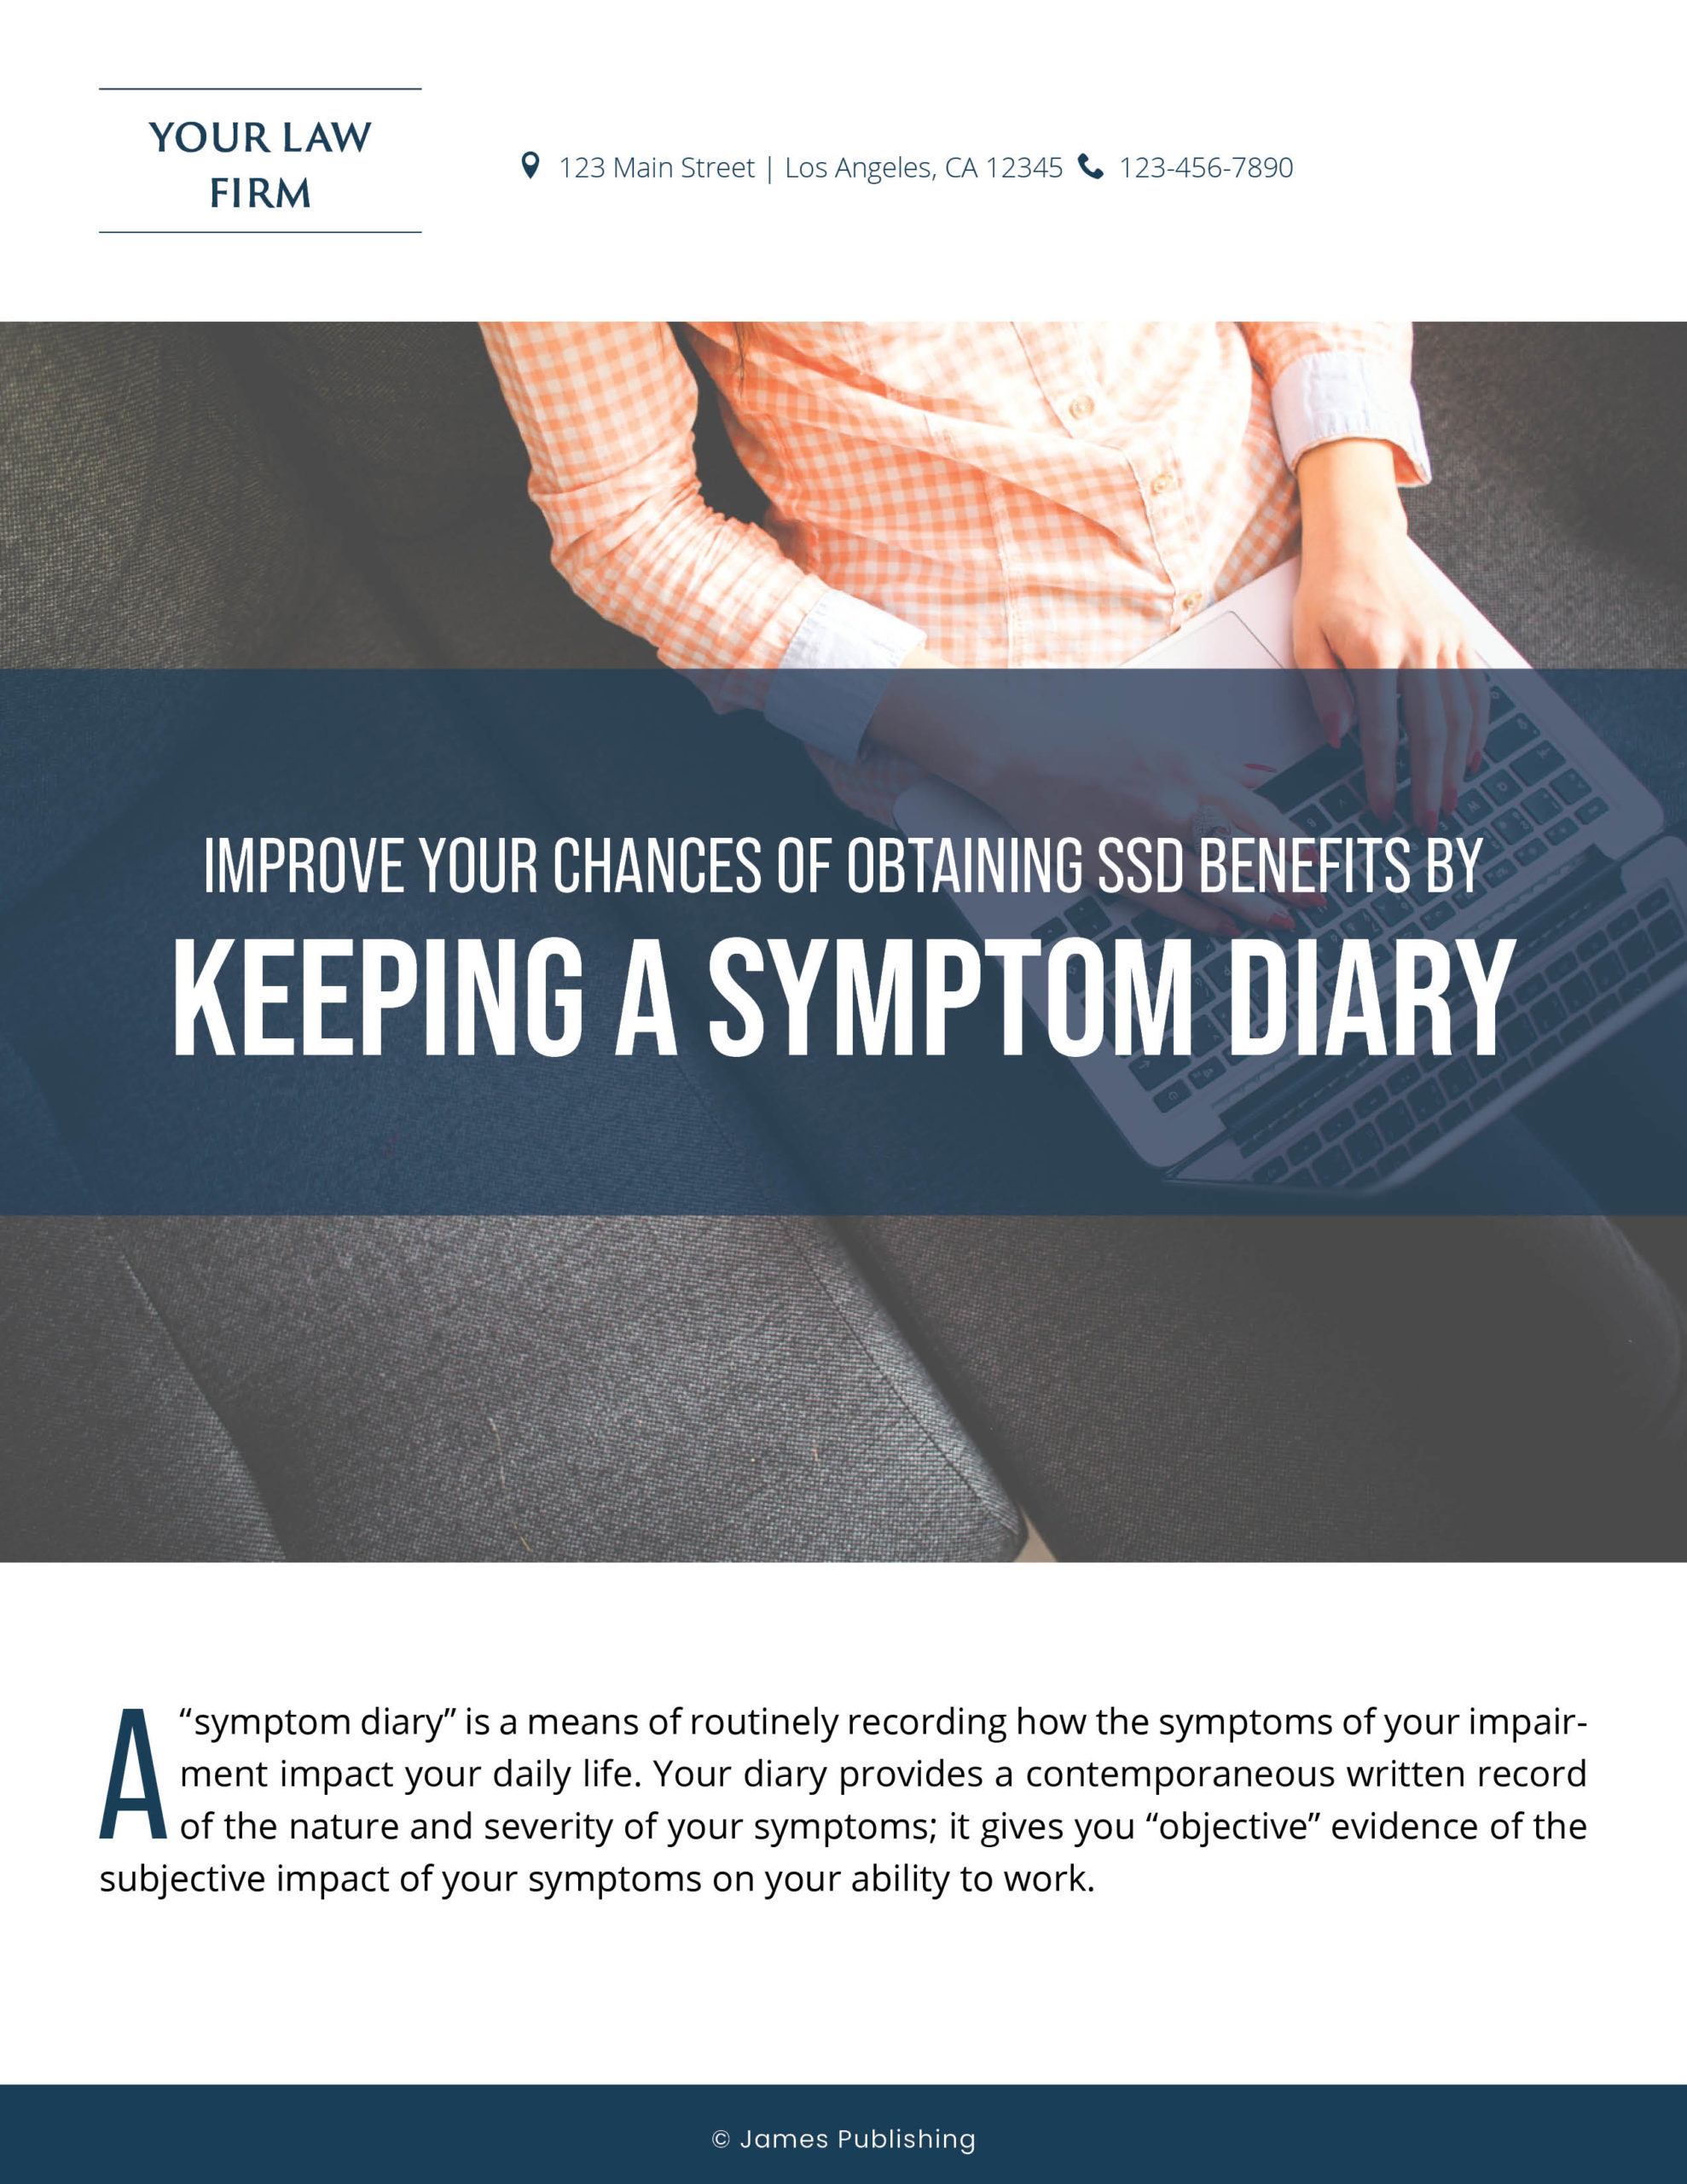 SSD-12 Improve Your Chances of Obtaining SSD Benefits by Keeping a Symptom Diary